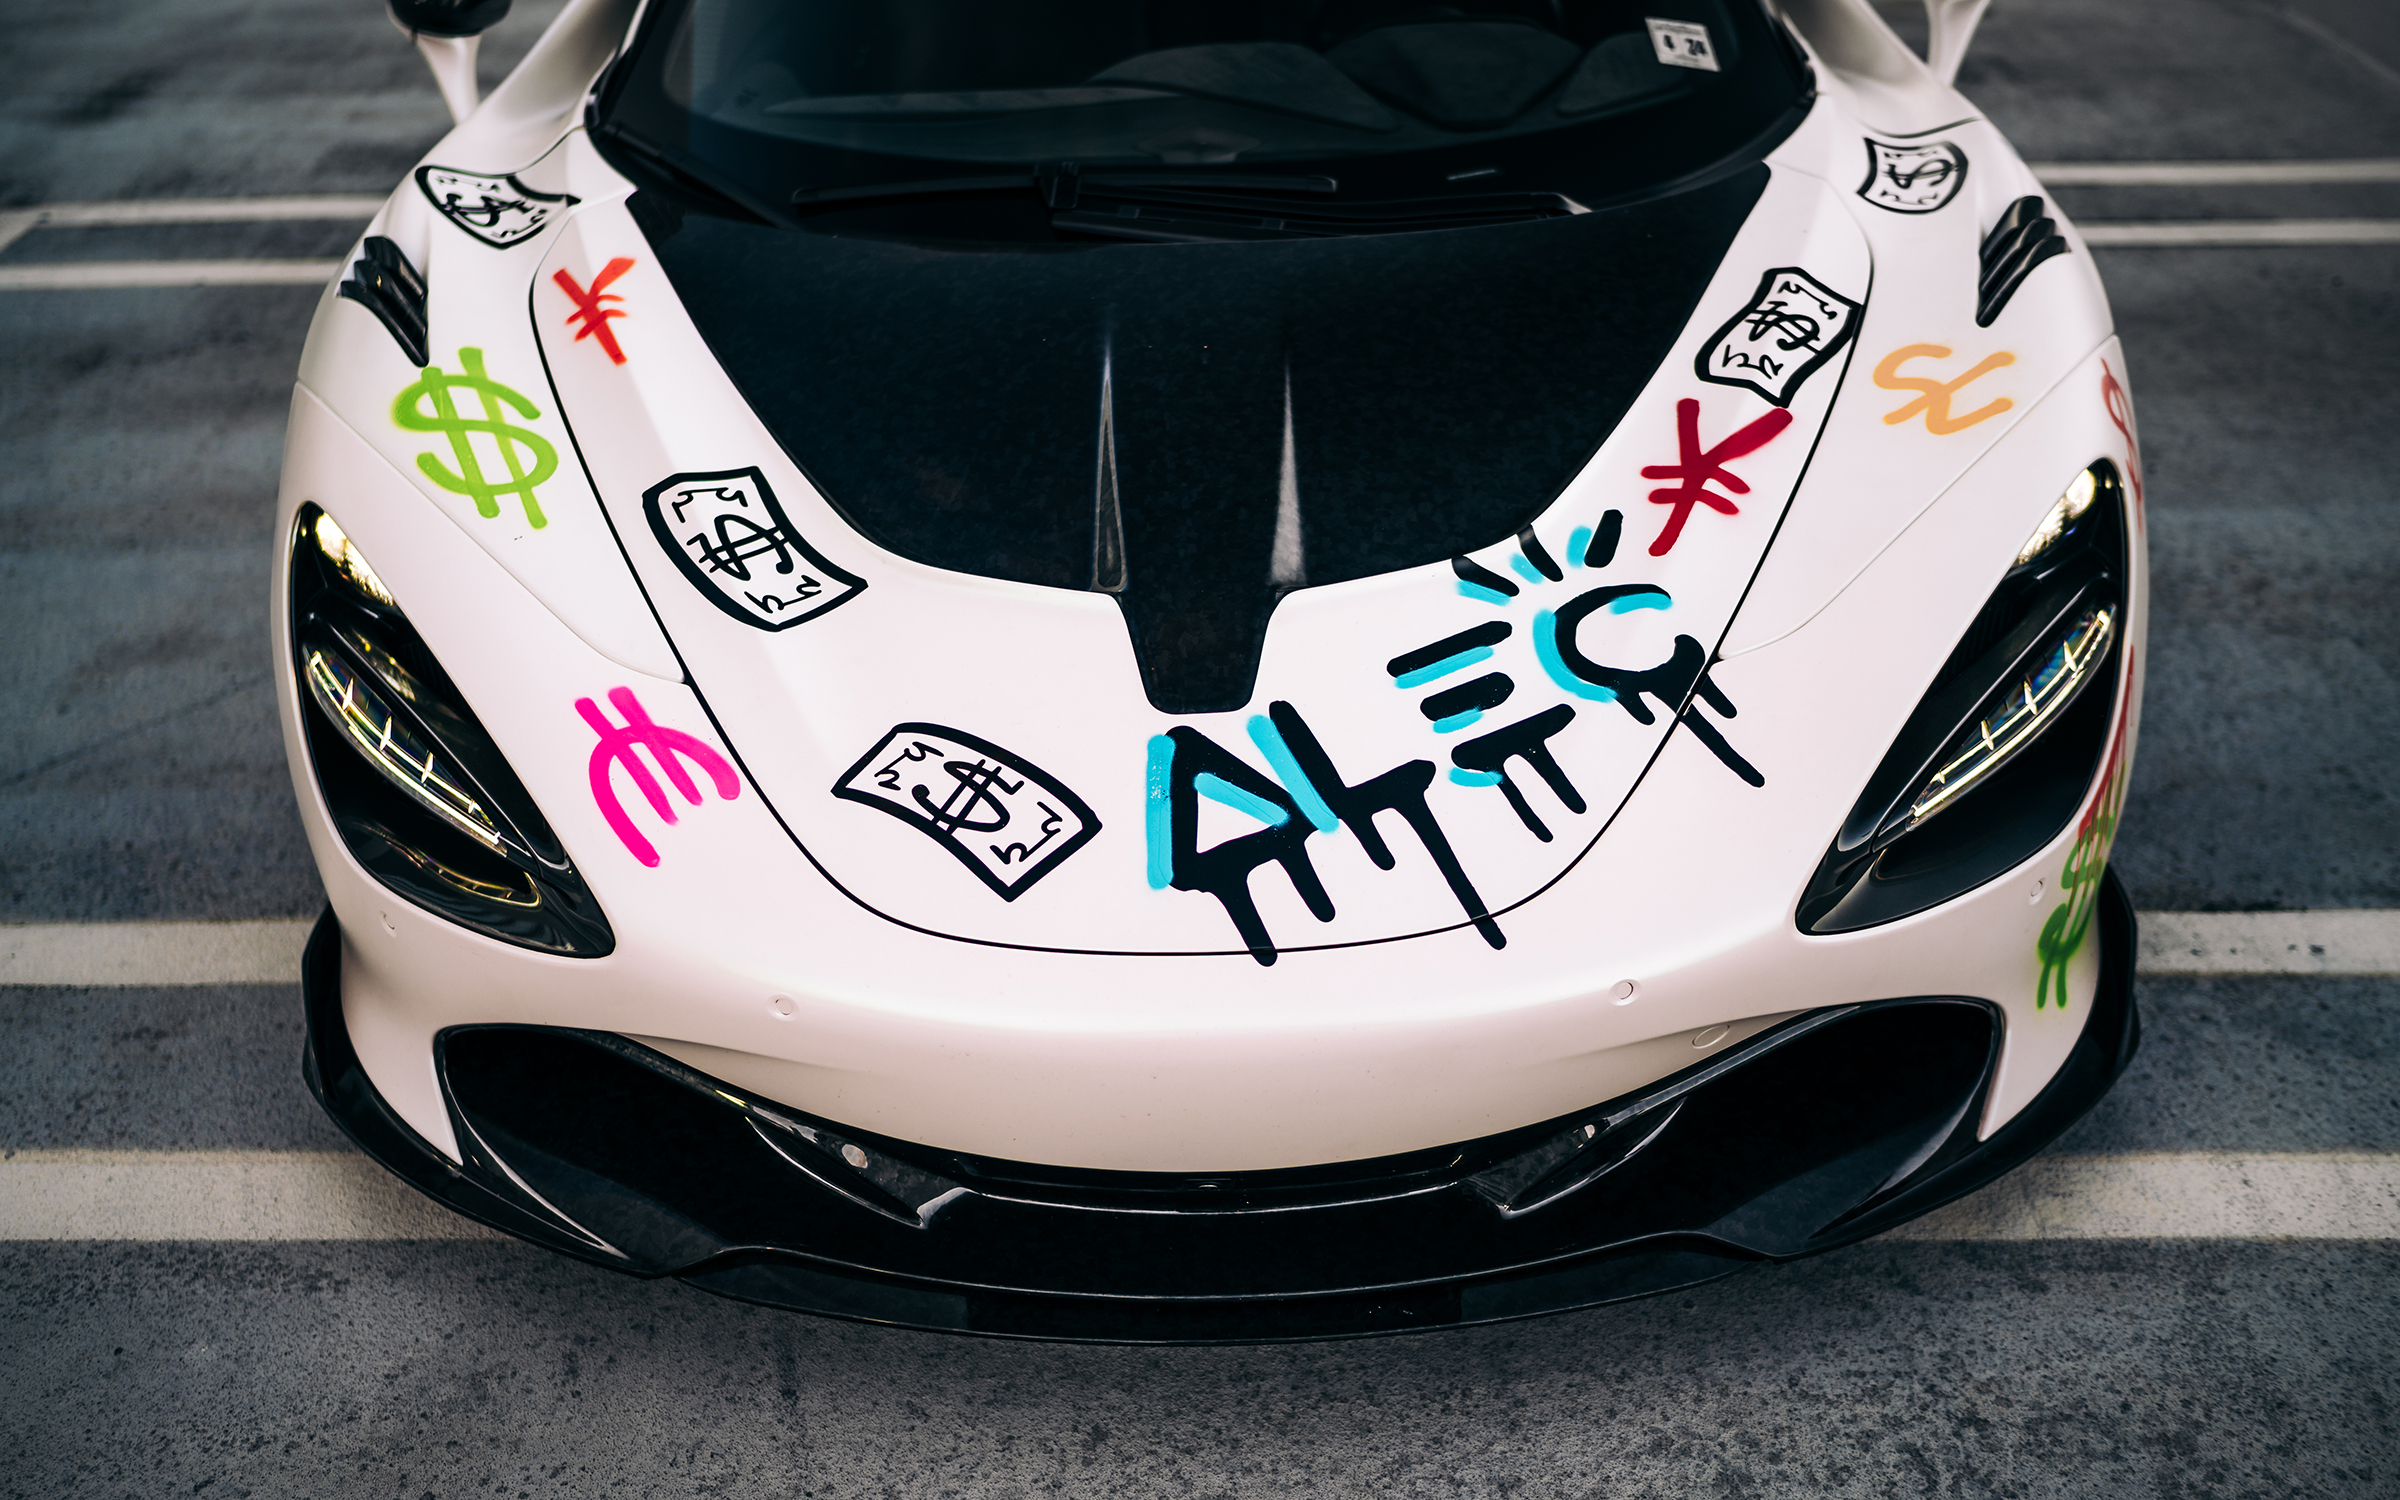 1016 Industries Introduces New $415,000 Spray Painted McLaren 720s by Alex Monopoly